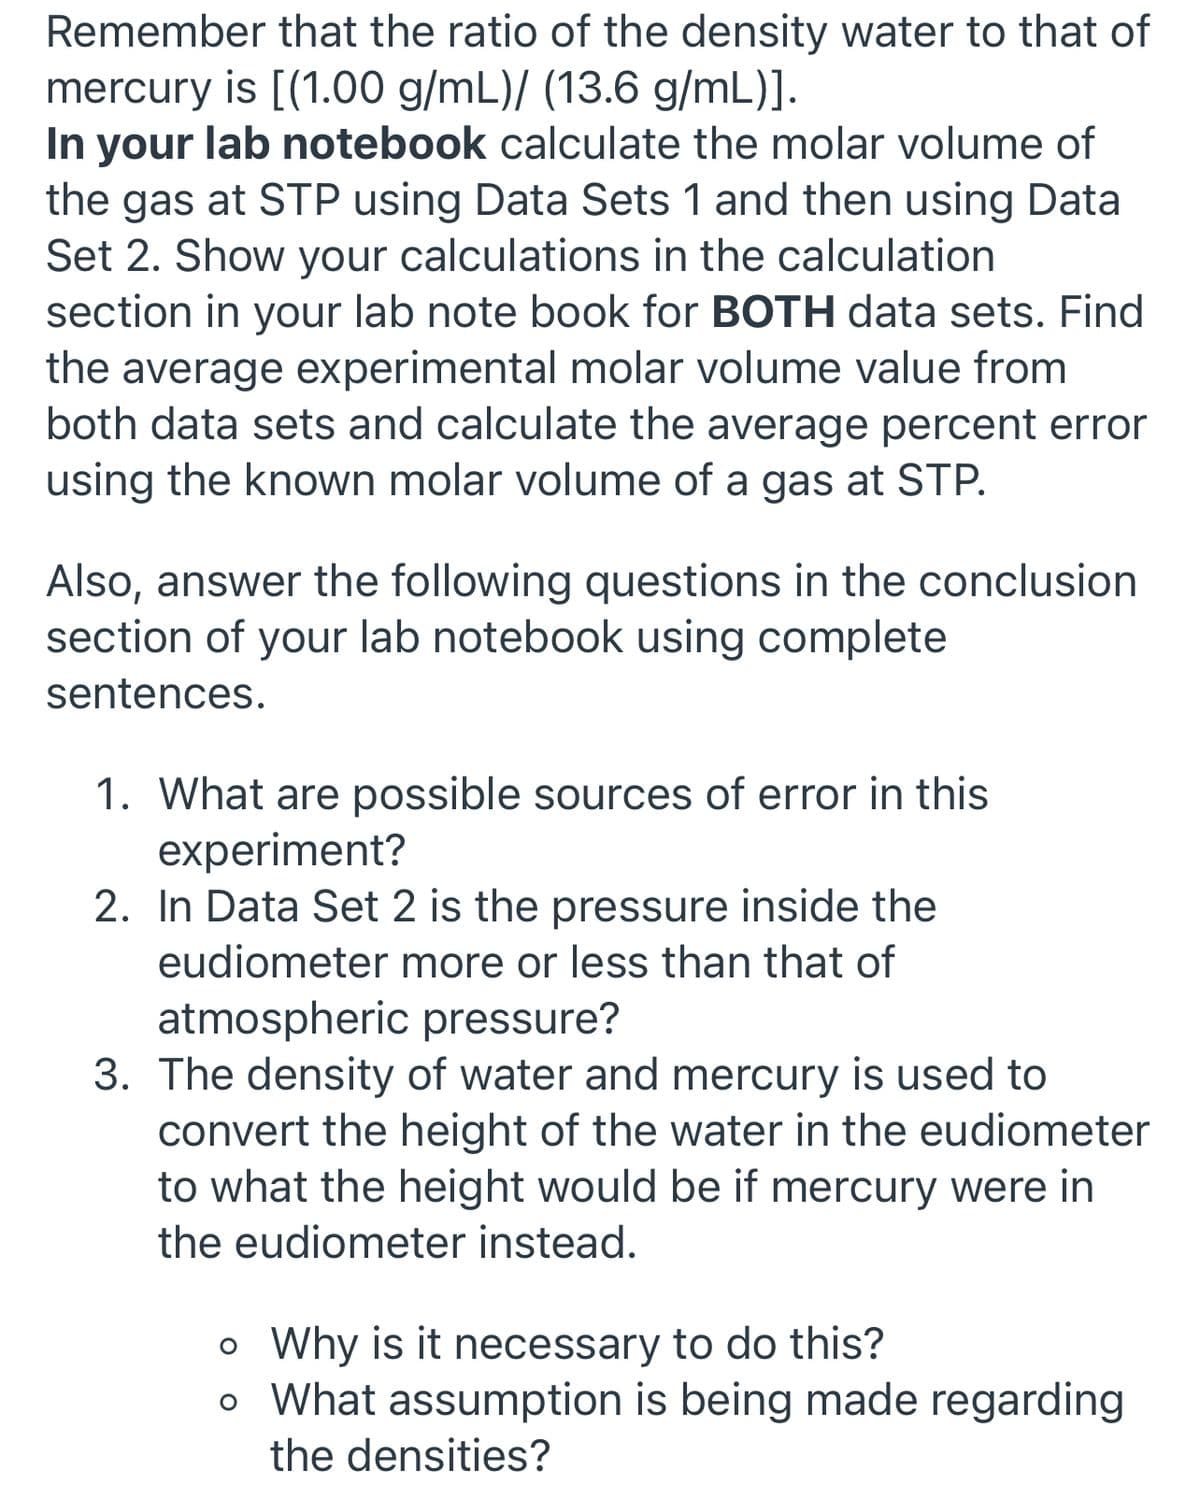 Remember that the ratio of the density water to that of
mercury is [(1.00 g/mL)/ (13.6 g/mL)].
In your lab notebook calculate the molar volume of
the gas at STP using Data Sets 1 and then using Data
Set 2. Show your calculations in the calculation
section in your lab note book for BOTH data sets. Find
the average experimental molar volume value from
both data sets and calculate the average percent error
using the known molar volume of a gas at STP.
Also, answer the following questions in the conclusion
section of your lab notebook using complete
sentences.
1. What are possible sources of error in this
experiment?
2. In Data Set 2 is the pressure inside the
eudiometer more or less than that of
atmospheric pressure?
3. The density of water and mercury is used to
convert the height of the water in the eudiometer
to what the height would be if mercury were in
the eudiometer instead.
o Why is it necessary to do this?
o What assumption is being made regarding
the densities?
